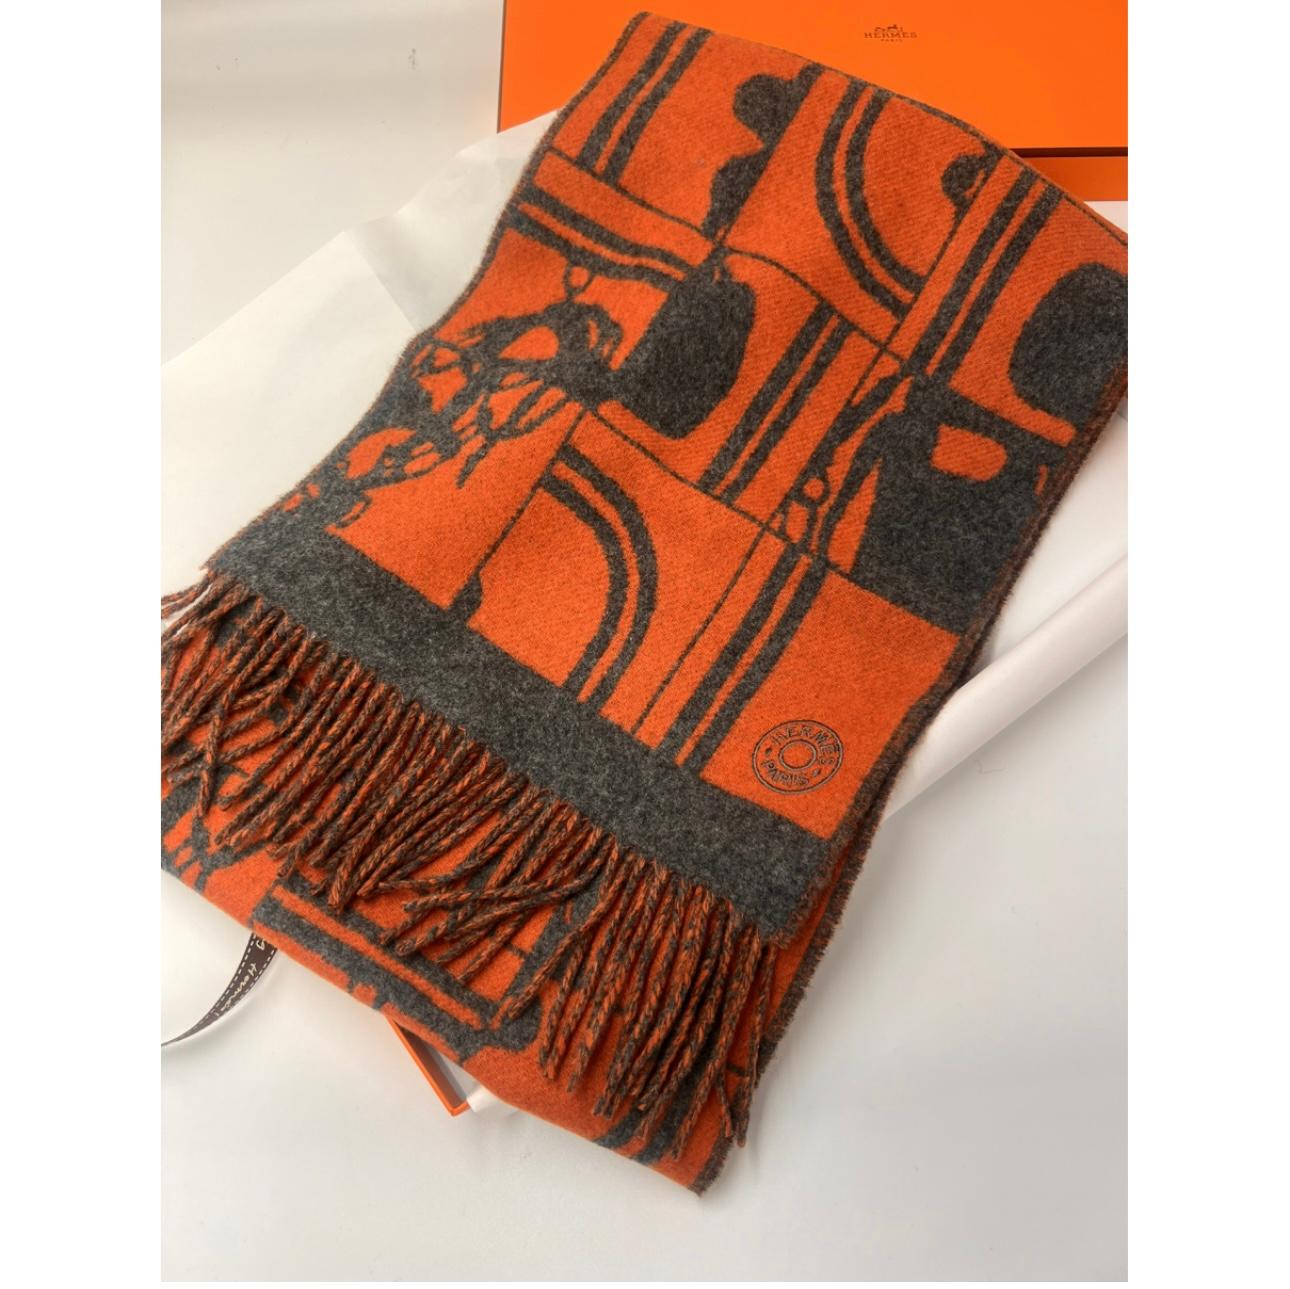 Hermes scarf in cashmere (100% cashmere). Cyrille Diatkine and Hugo Grygkar's Brides de Gala design appears on this cashmere en Desordre muffler thanks to jacquard weaving. BRAND NEW IN BOX. NEVER USED. Dimensions: 25 x 150 cm